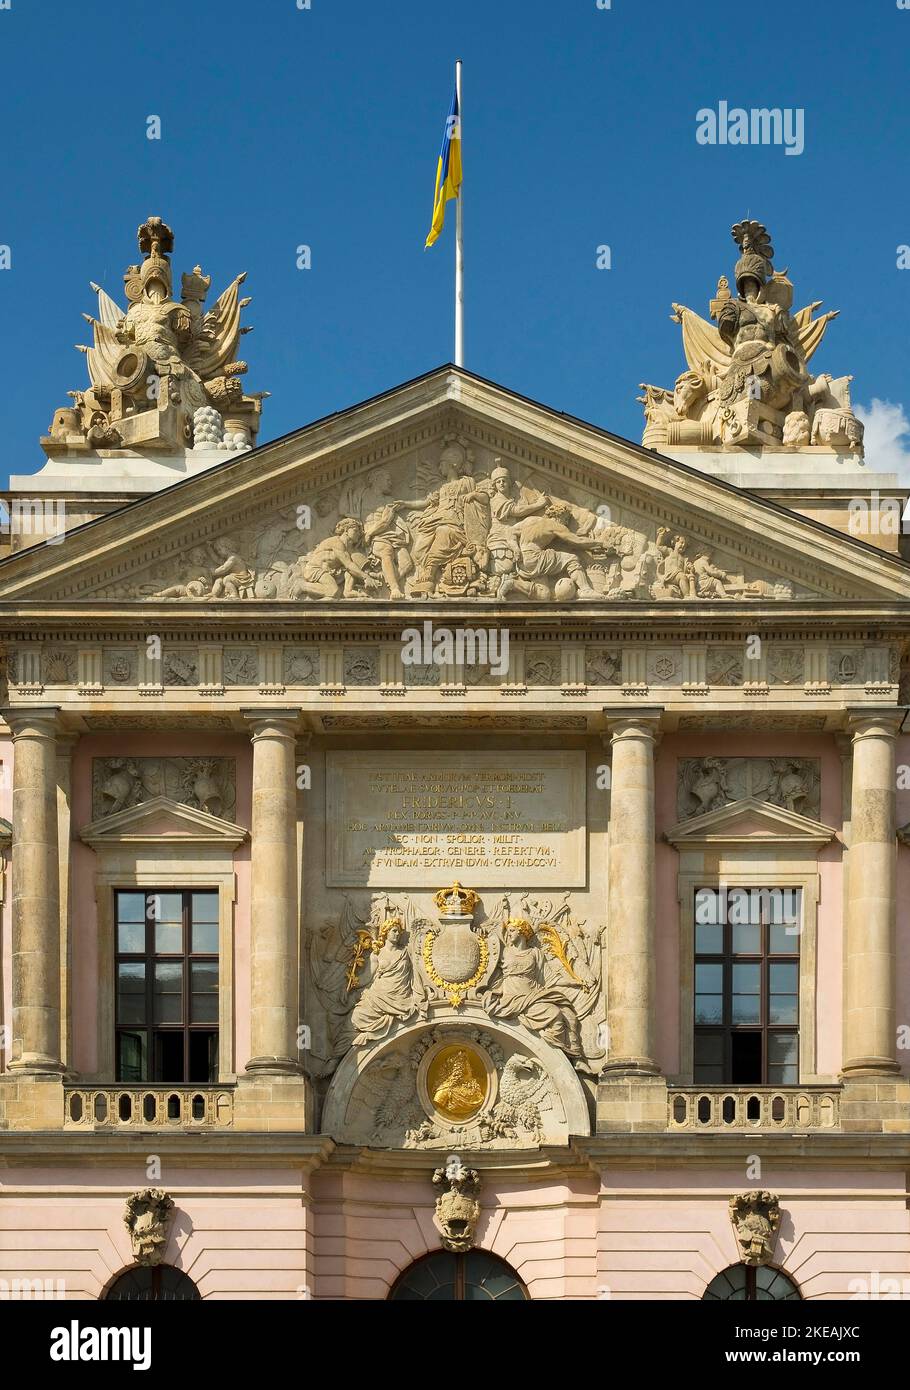 German Historical Museum in the baroque armoury on Unter den Linden boulevard, facade detail, Germany, Berlin Stock Photo